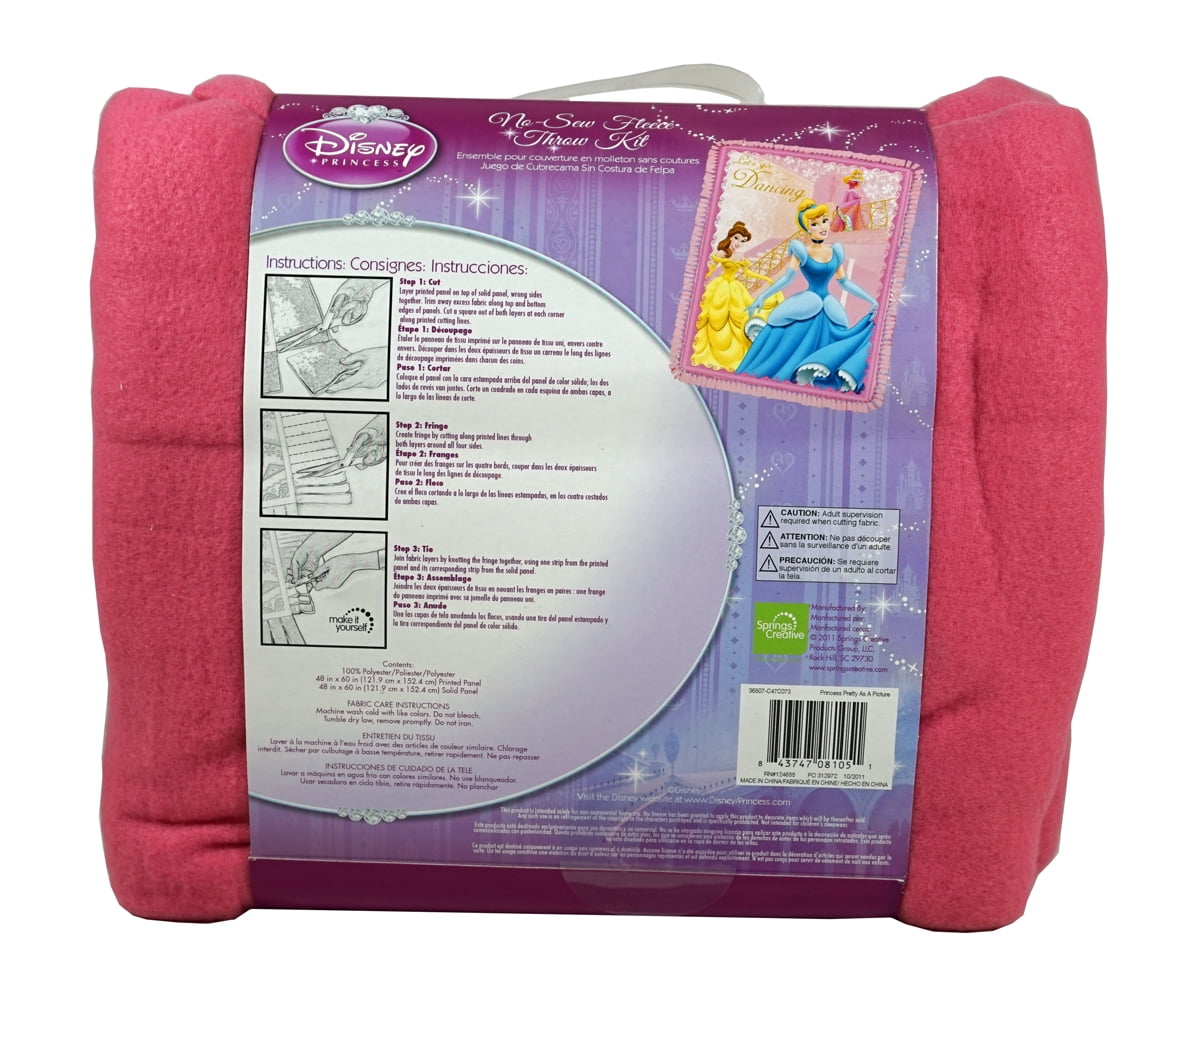 NEW no sew fleece blanket kit - arts & crafts - by owner - sale